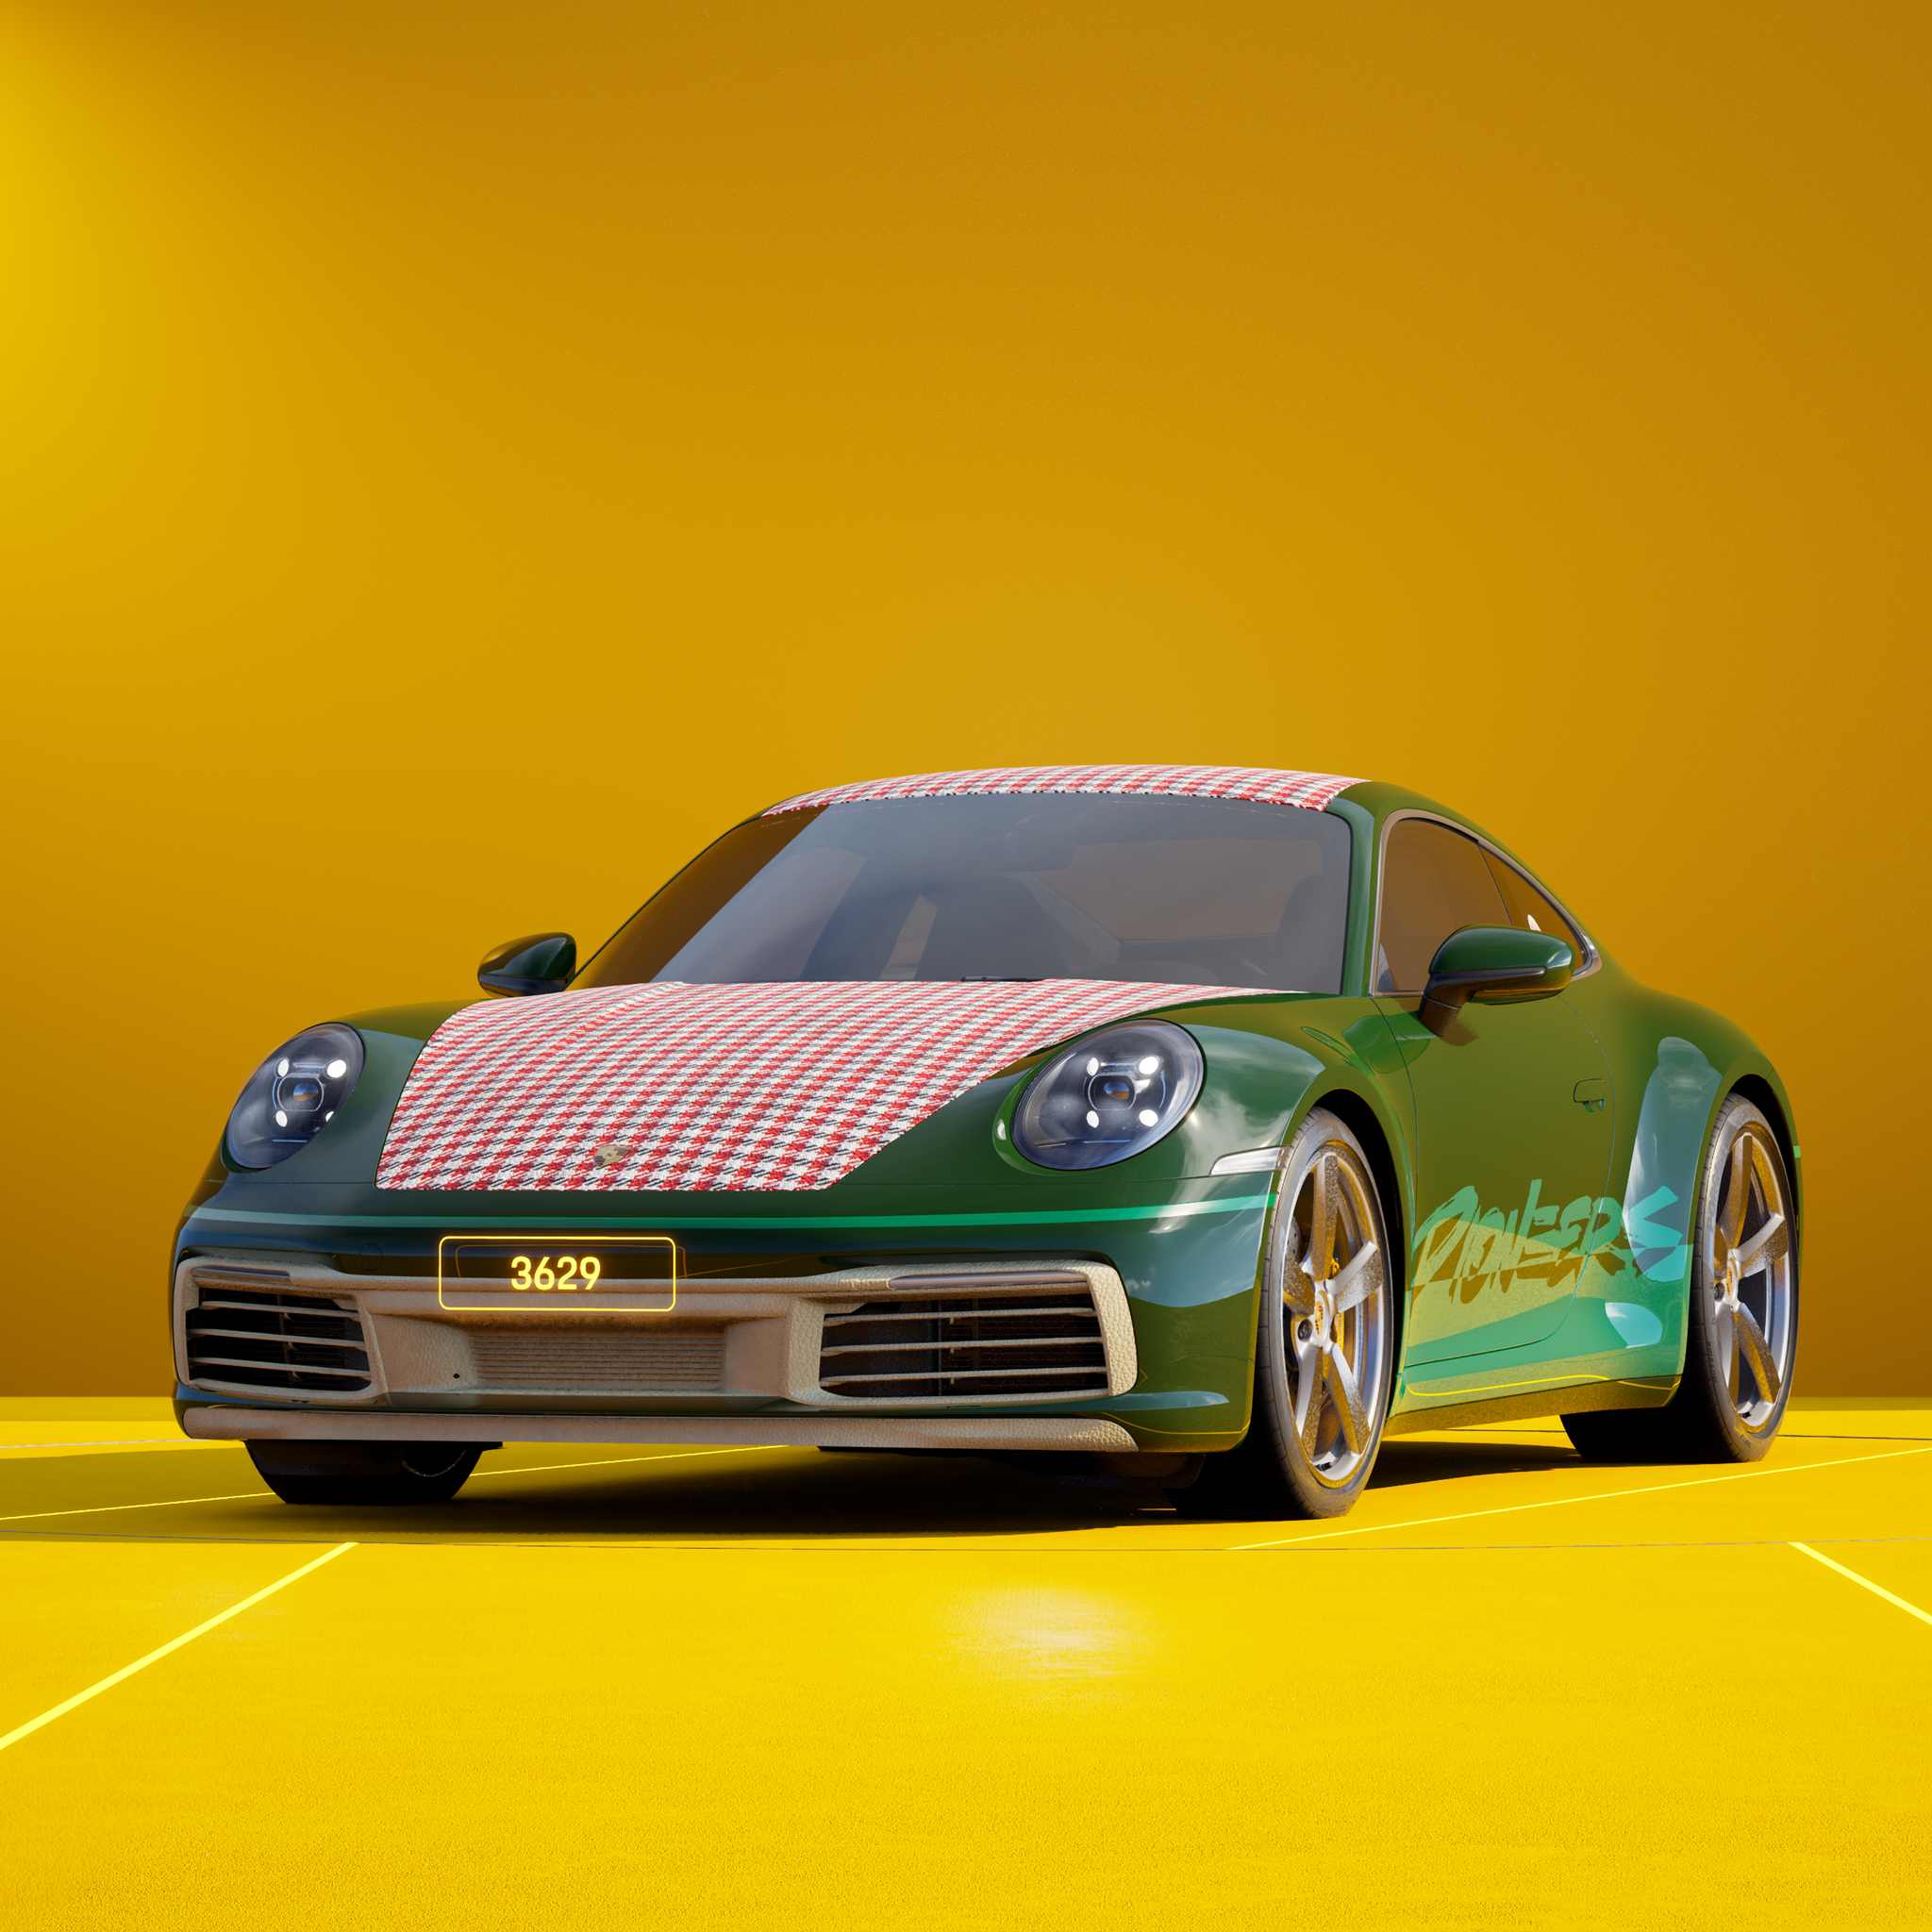 The PORSCHΞ 911 3629 image in phase